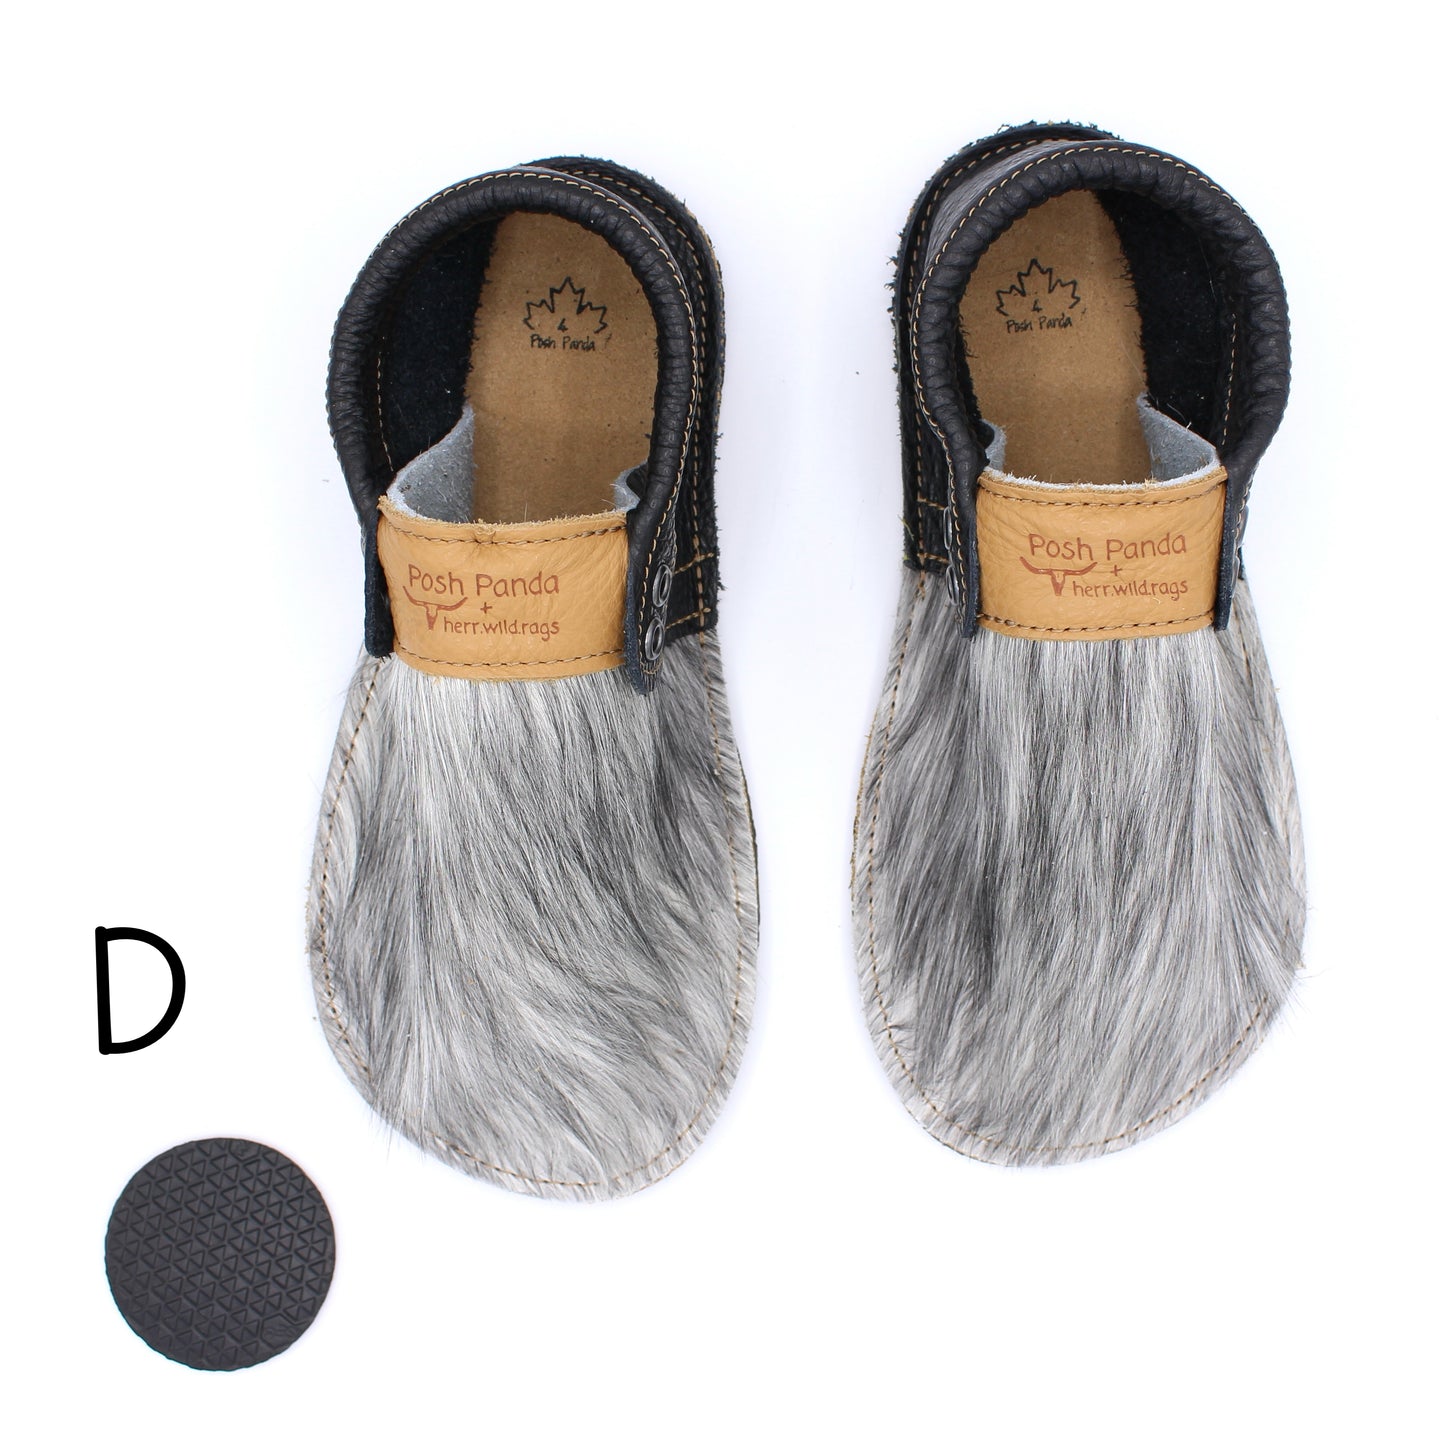 Hair Hide Mocs - YOUTH - Size 4 (4mm Sole)